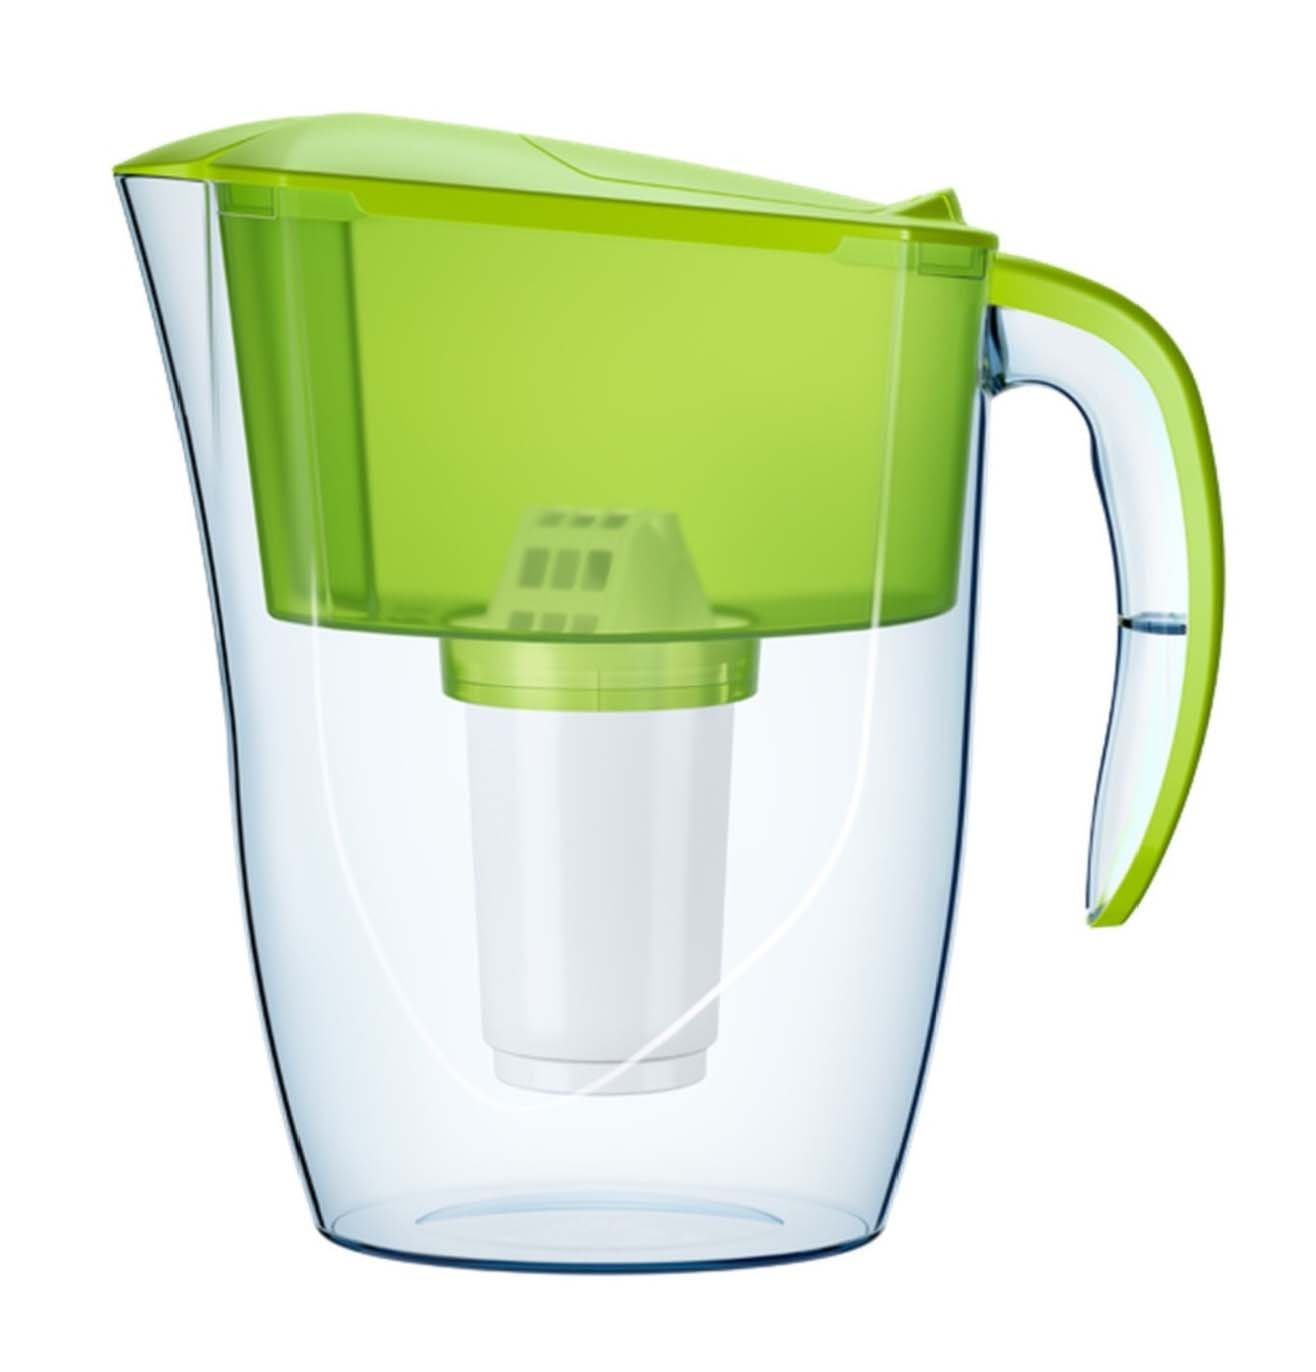 2.4 L Smile Water Filter Pitcher Jug A5 Mg Bacteriostatic cartridge Magnesium 